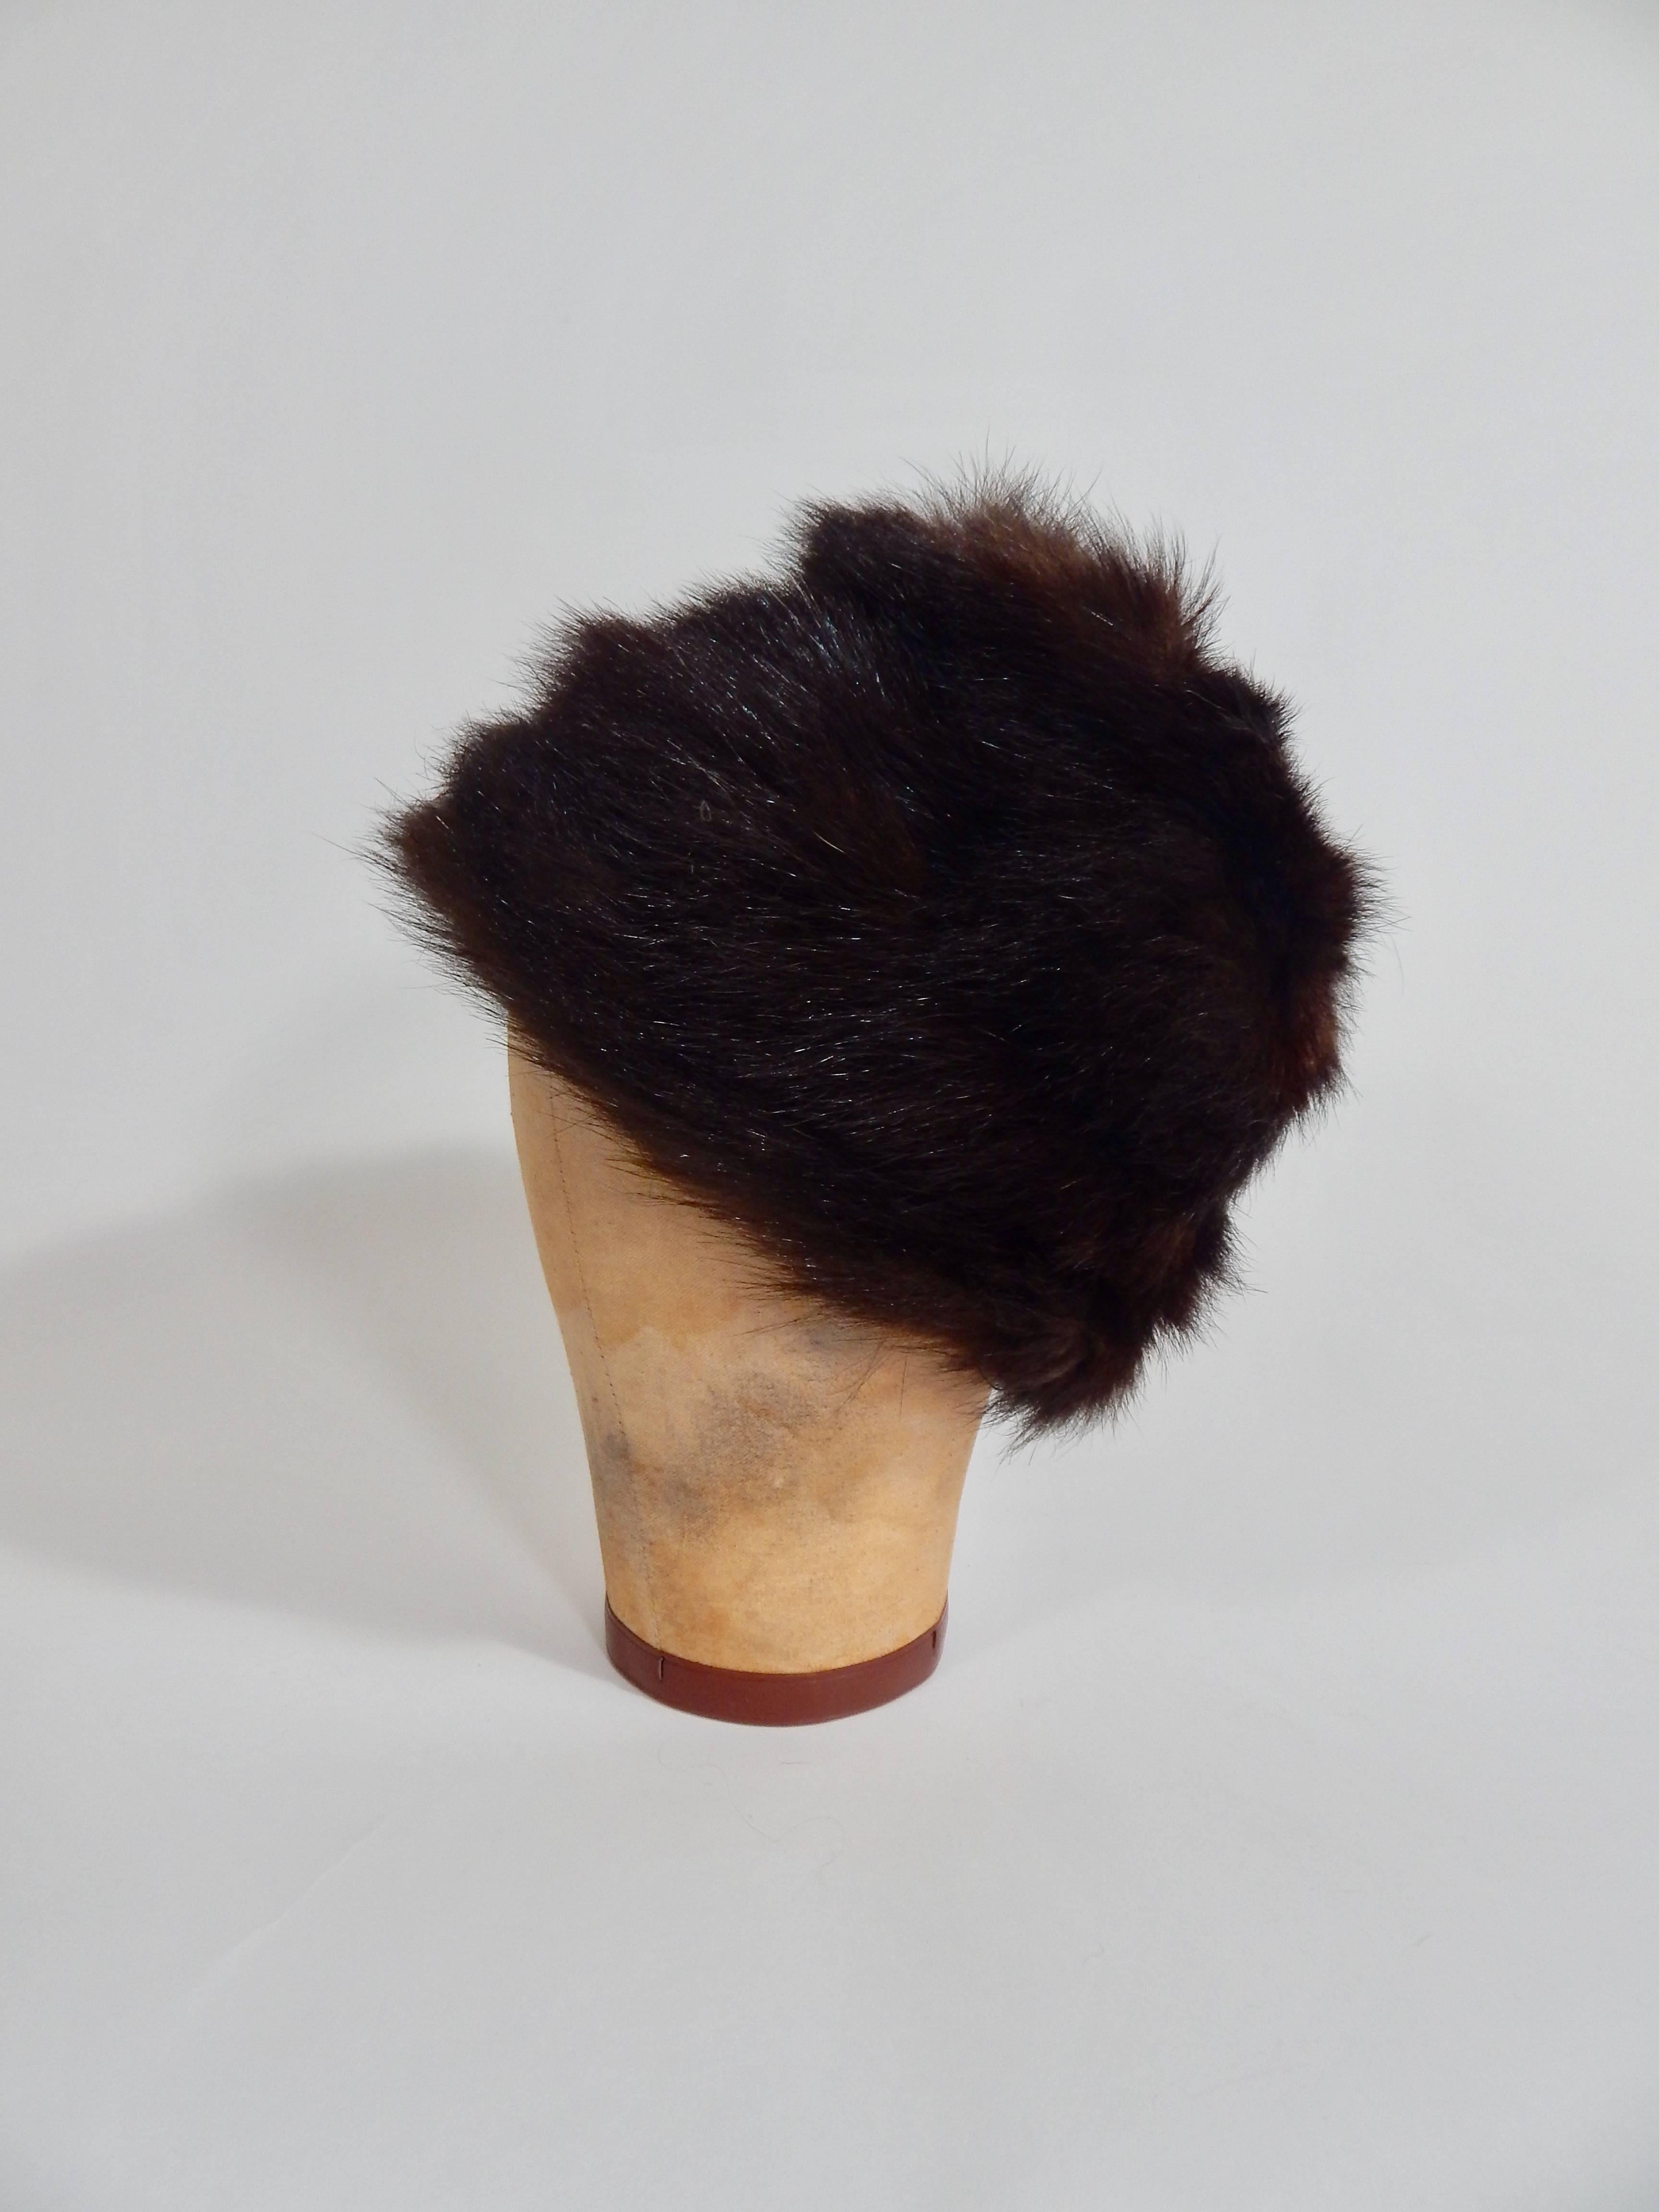 1950s Franklin Simon Salon Choclate Colored Mink Hat. Lined in Chocolate Browne Mink Silk. Size 22 inches. Excellent Condition.